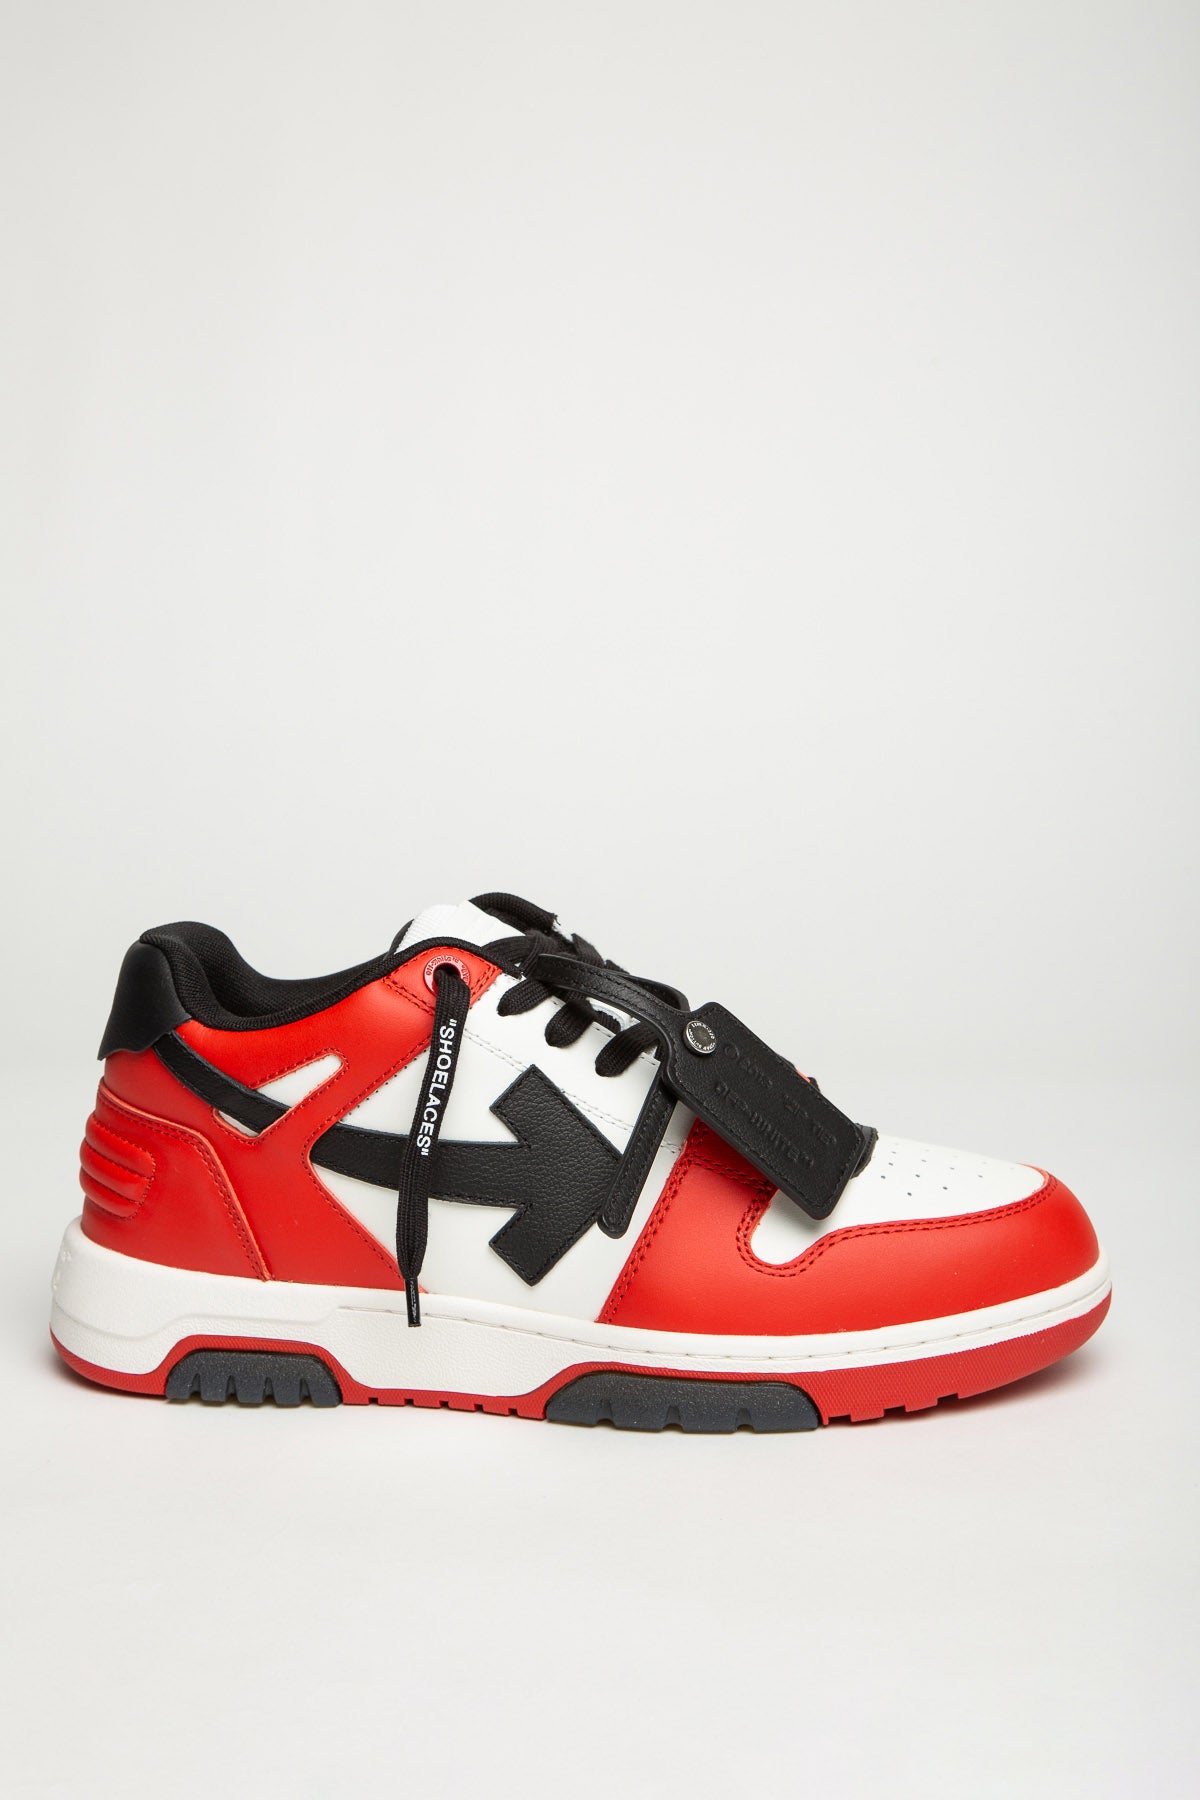 OFF-WHITE RED & BLACK OUT OF OFFICE SNEAKERS LA